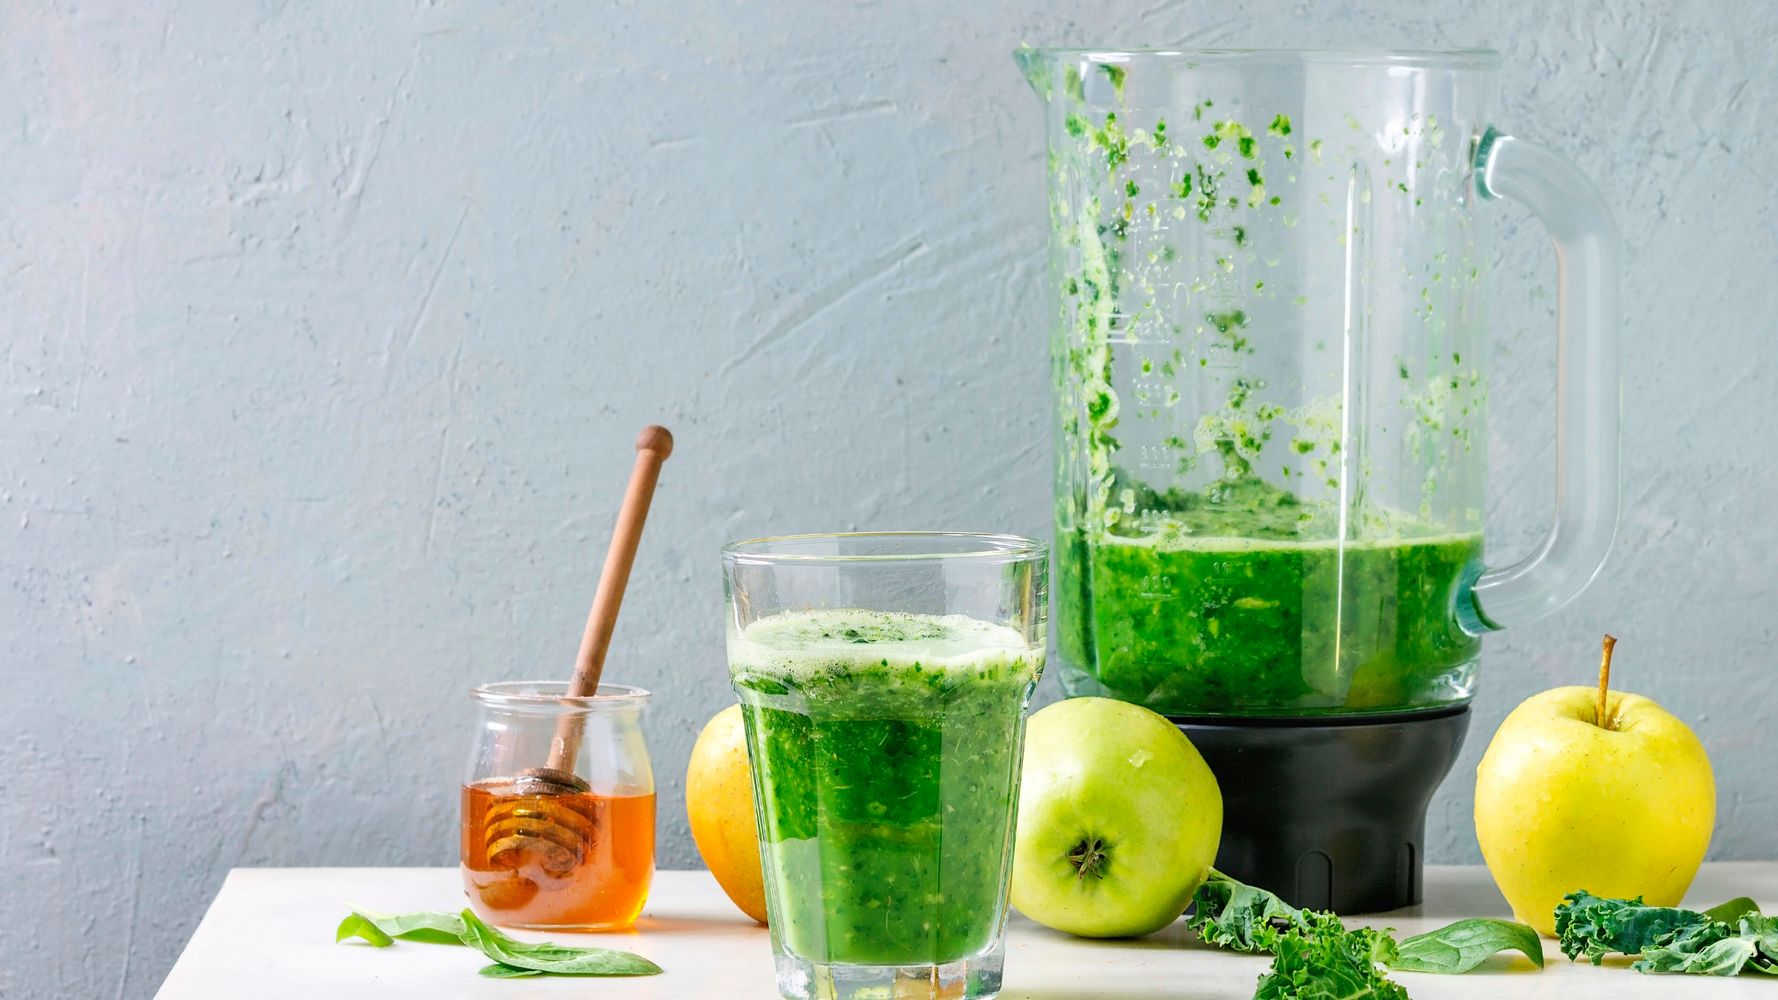 Buying A Blender? Here's The Difference Between Cheap And